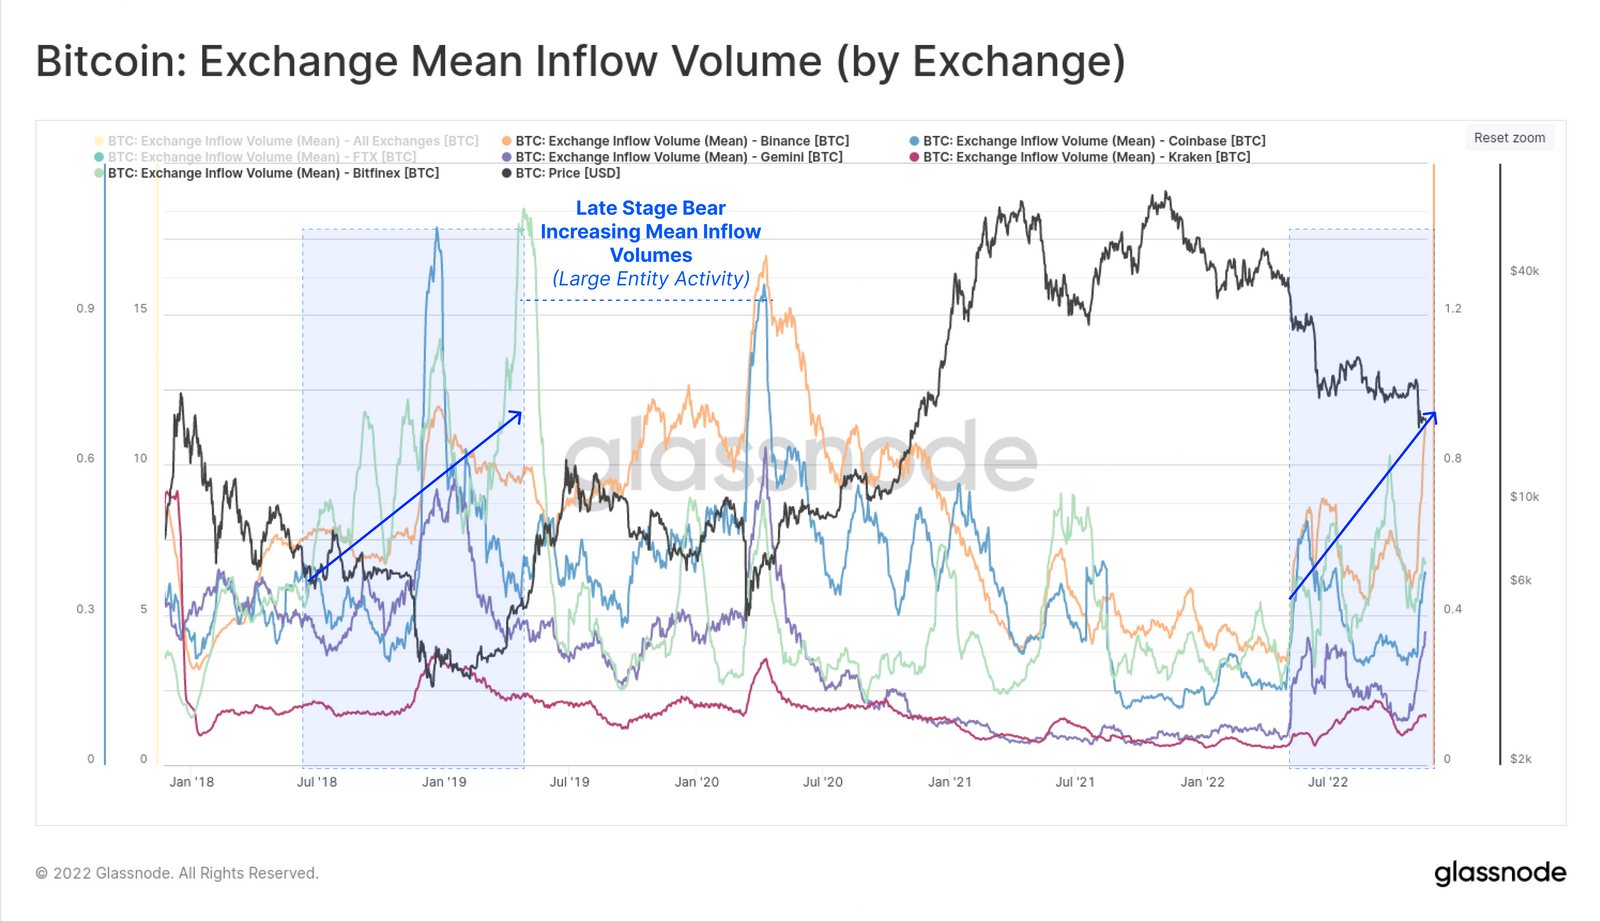 The mean inflow volume of Bitcoin to crypto exchanges against Bitcoin price.